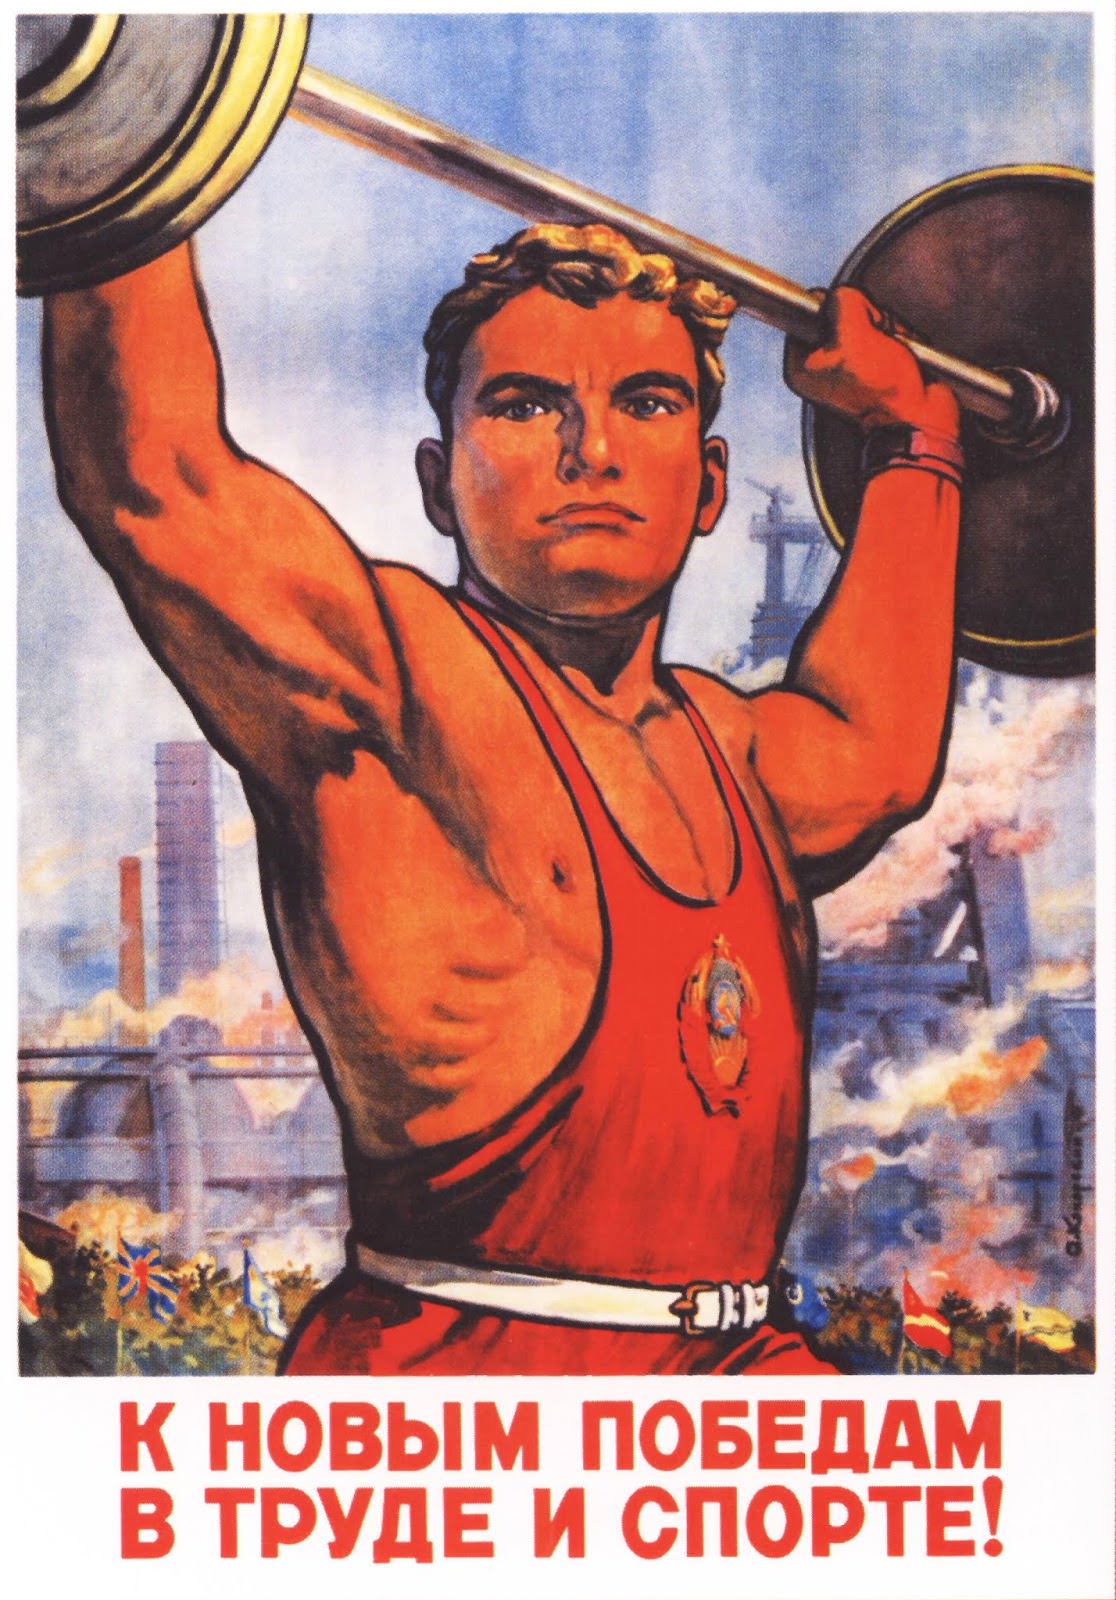 Towards new victories in sports and labor!